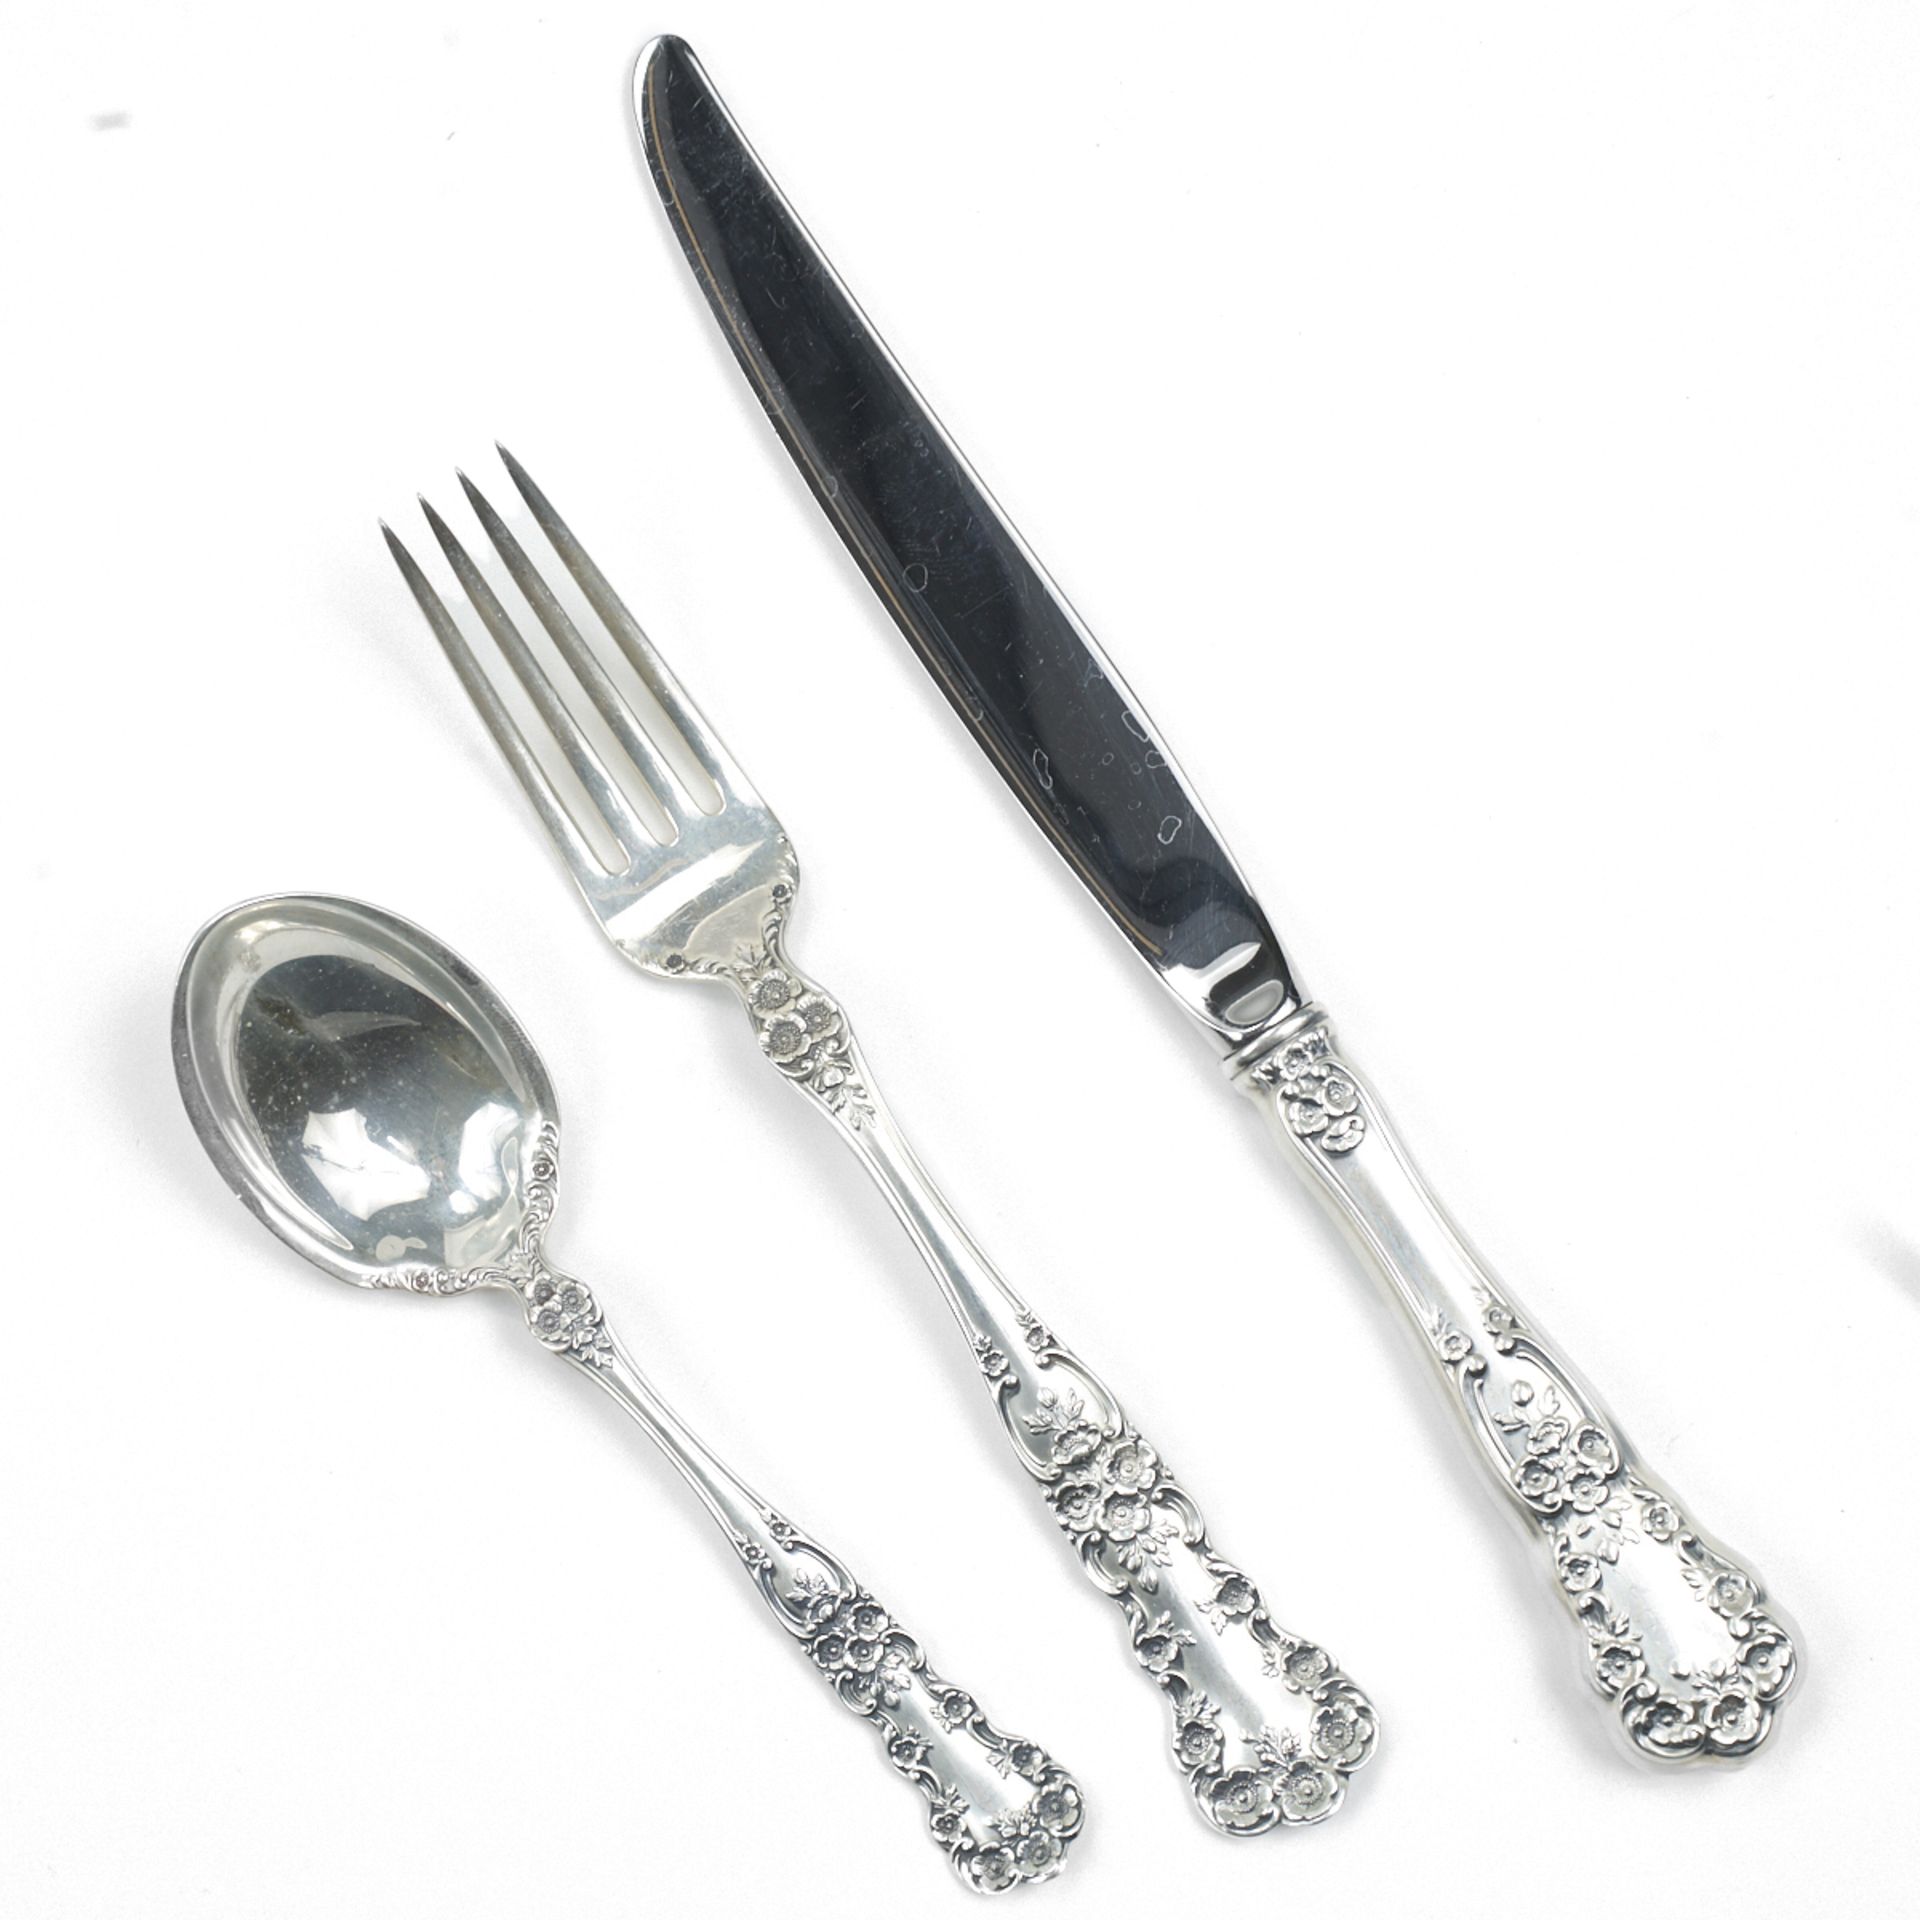 Set of Gorham Buttercup Sterling Silver Flatware - Image 3 of 7